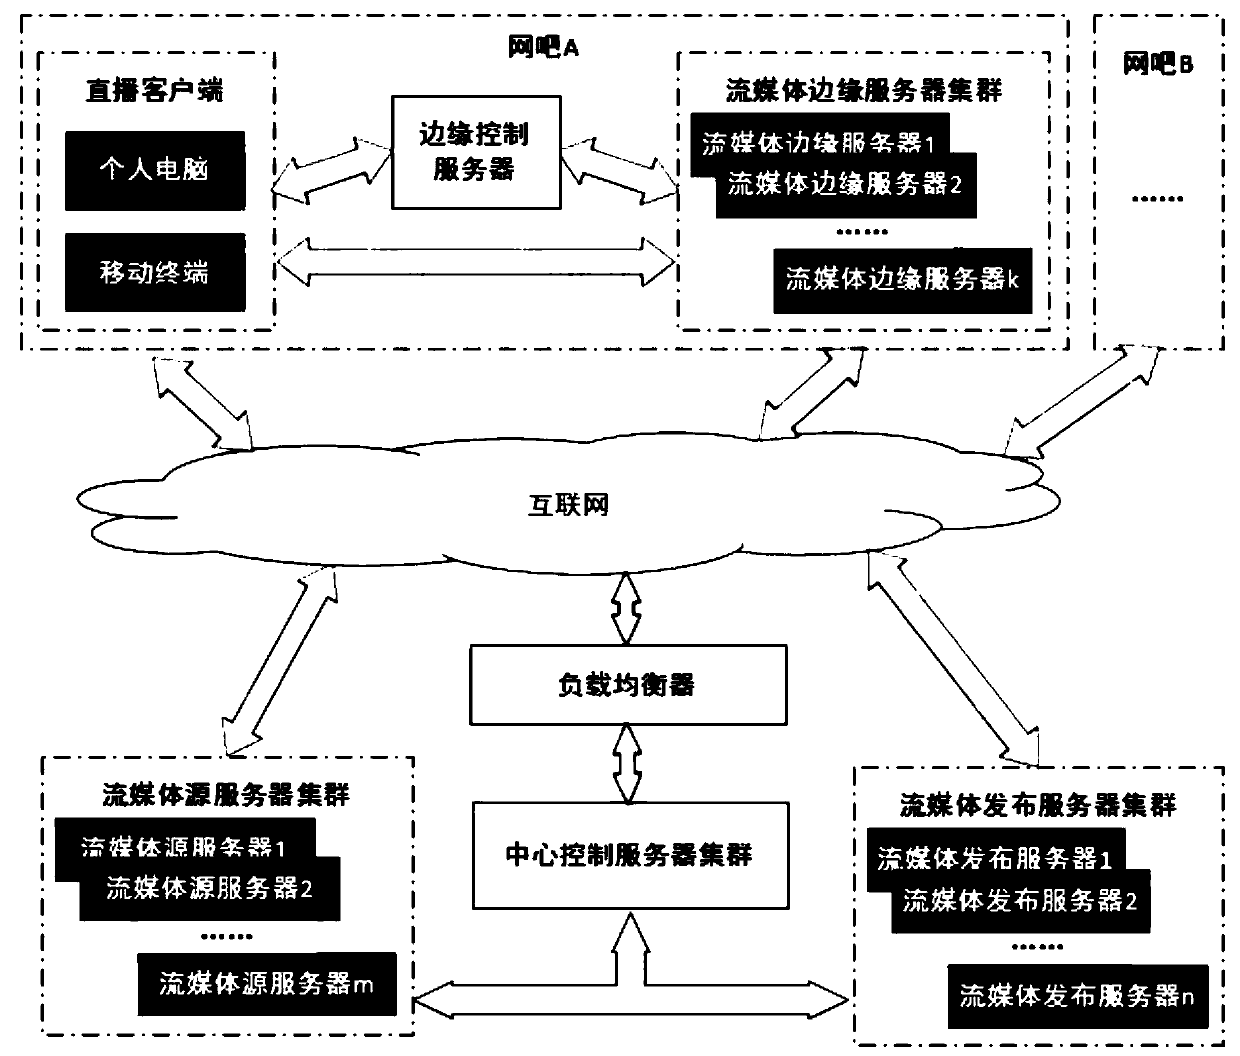 A live video system based on three-tier server architecture for Internet cafe environment